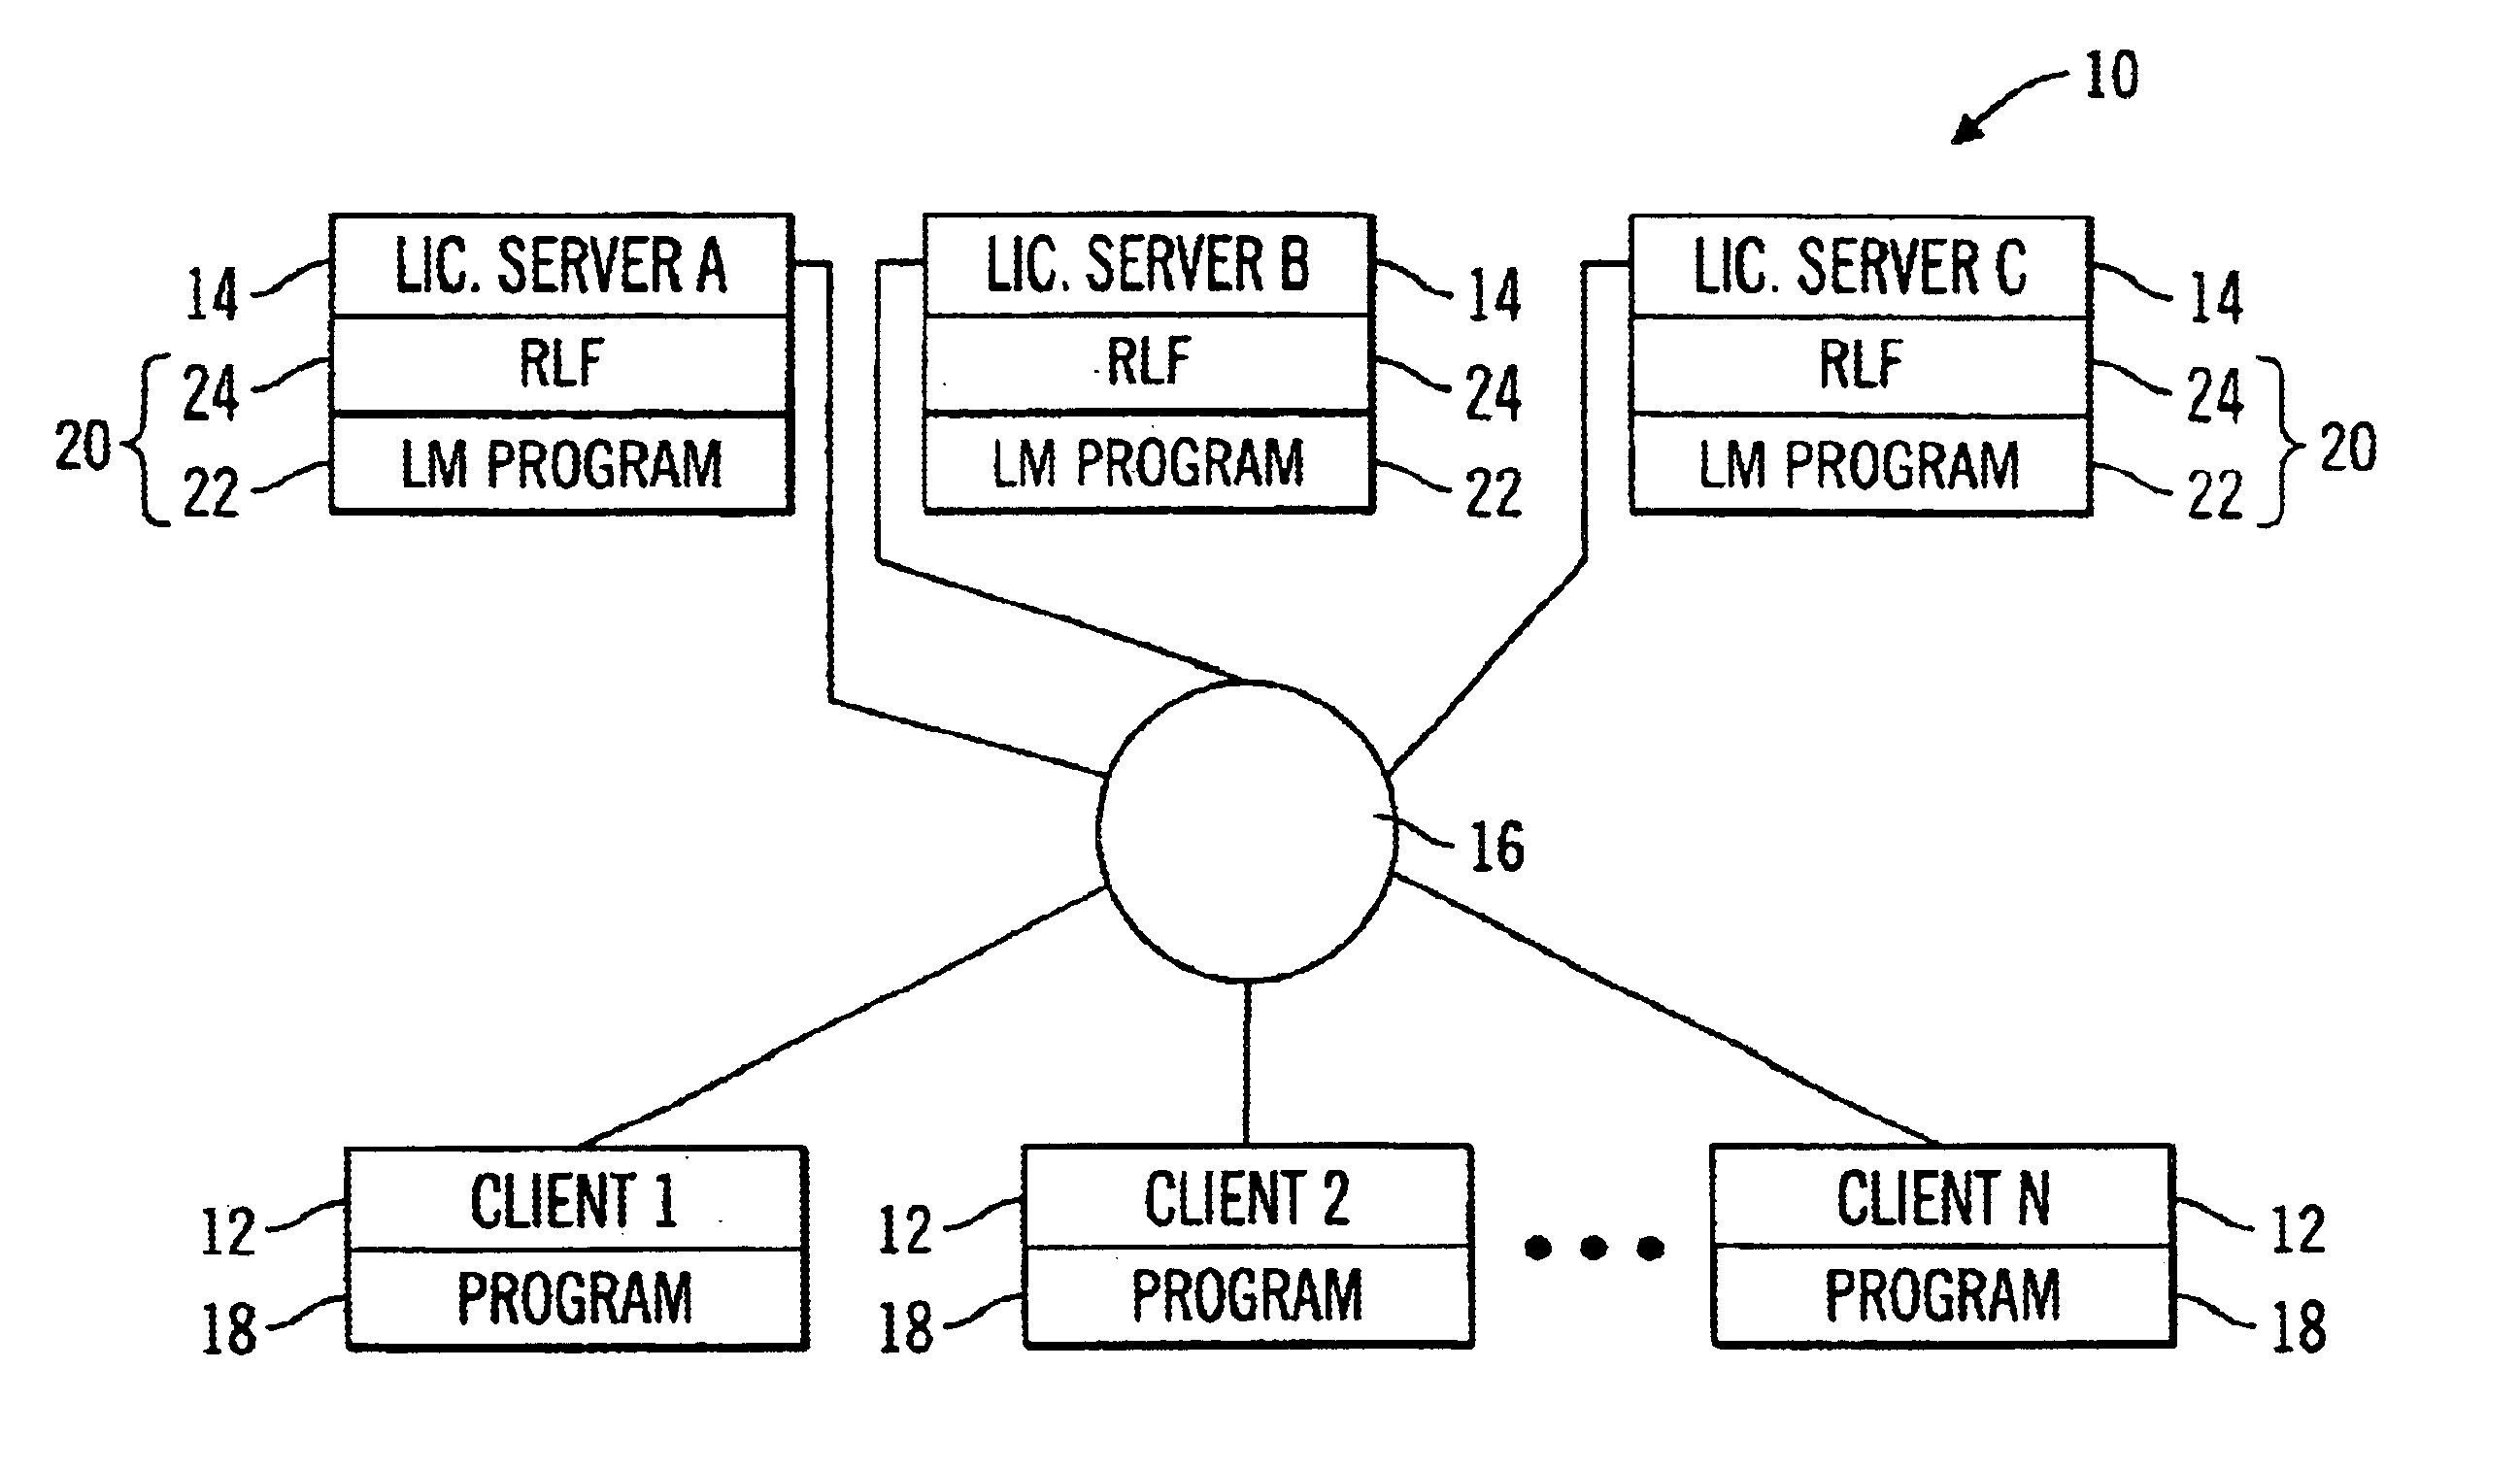 System and method for selecting a server in a multiple server license management system